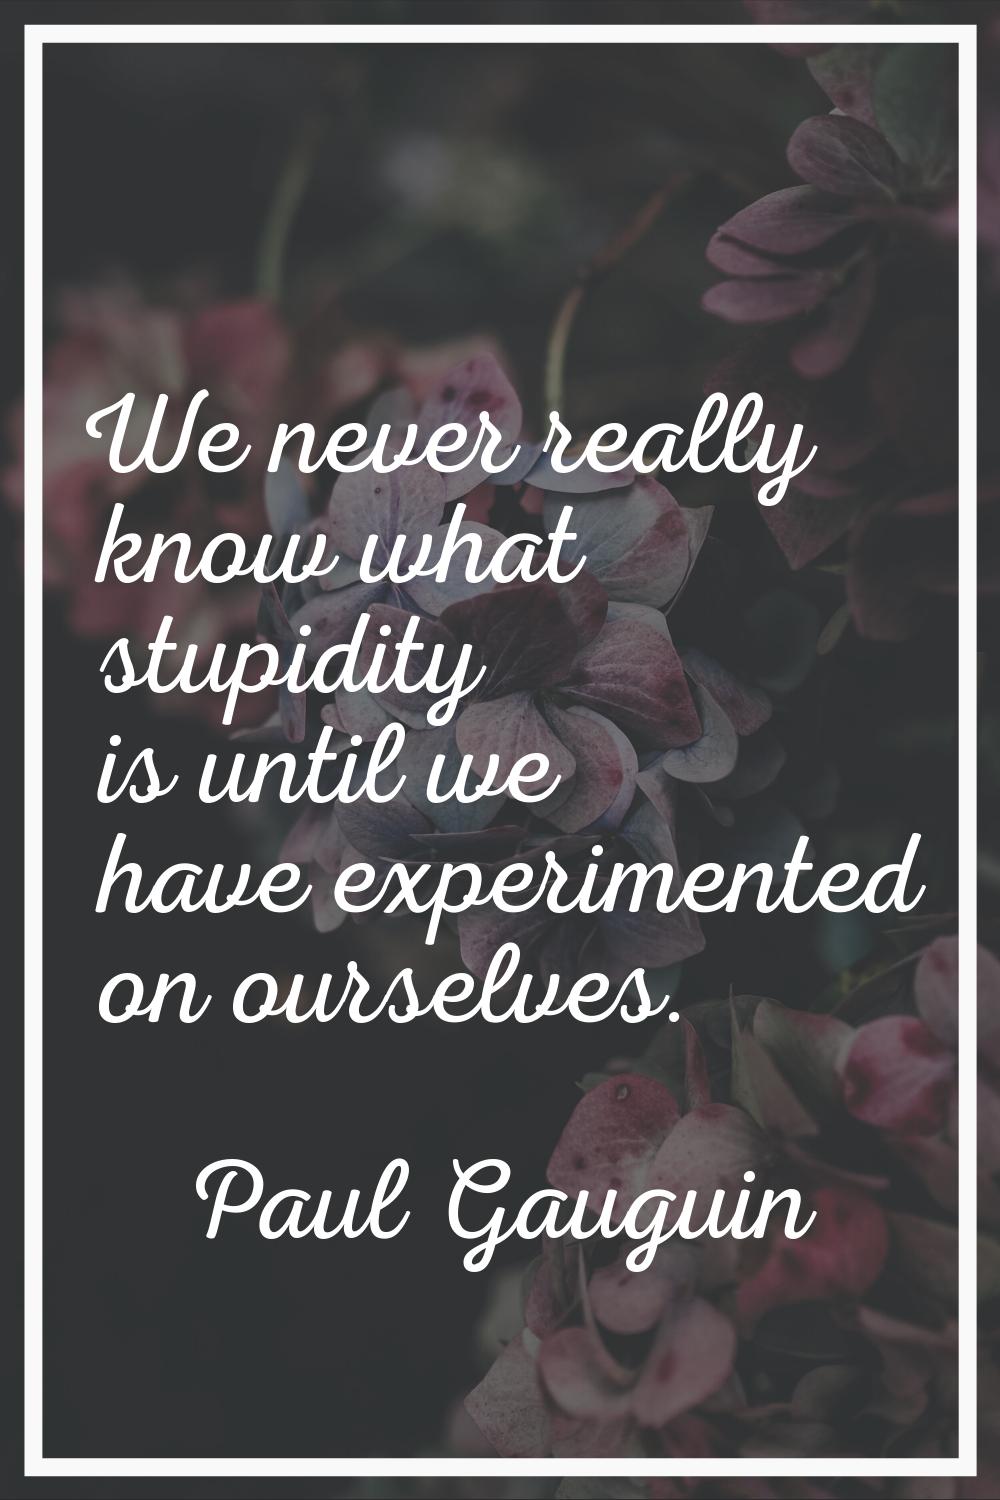 We never really know what stupidity is until we have experimented on ourselves.